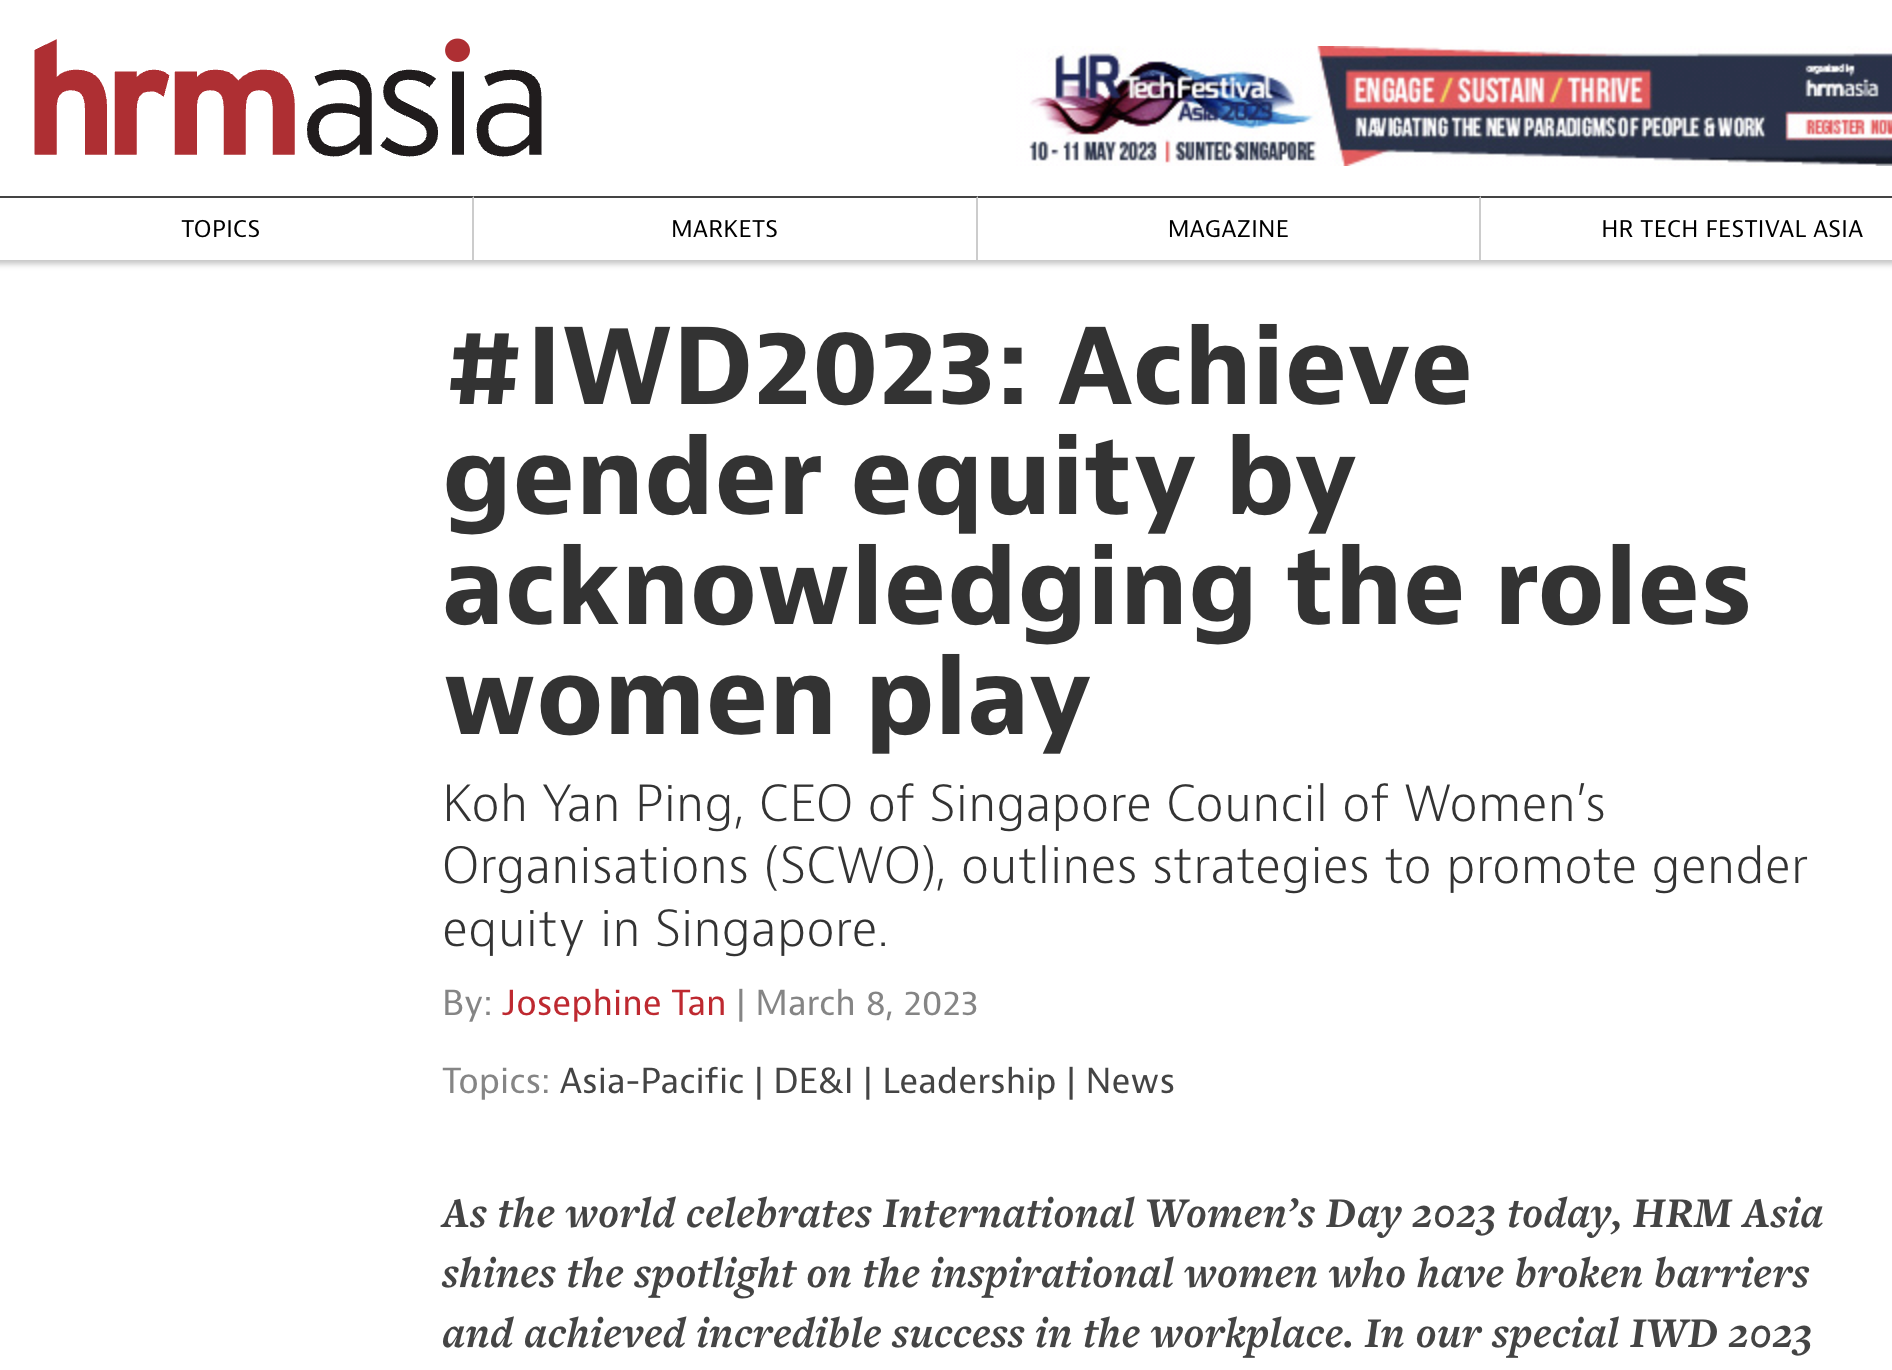 https://hrmasia.com/iwd2023-achieve-gender-equity-by-acknowledging-the-roles-women-play/